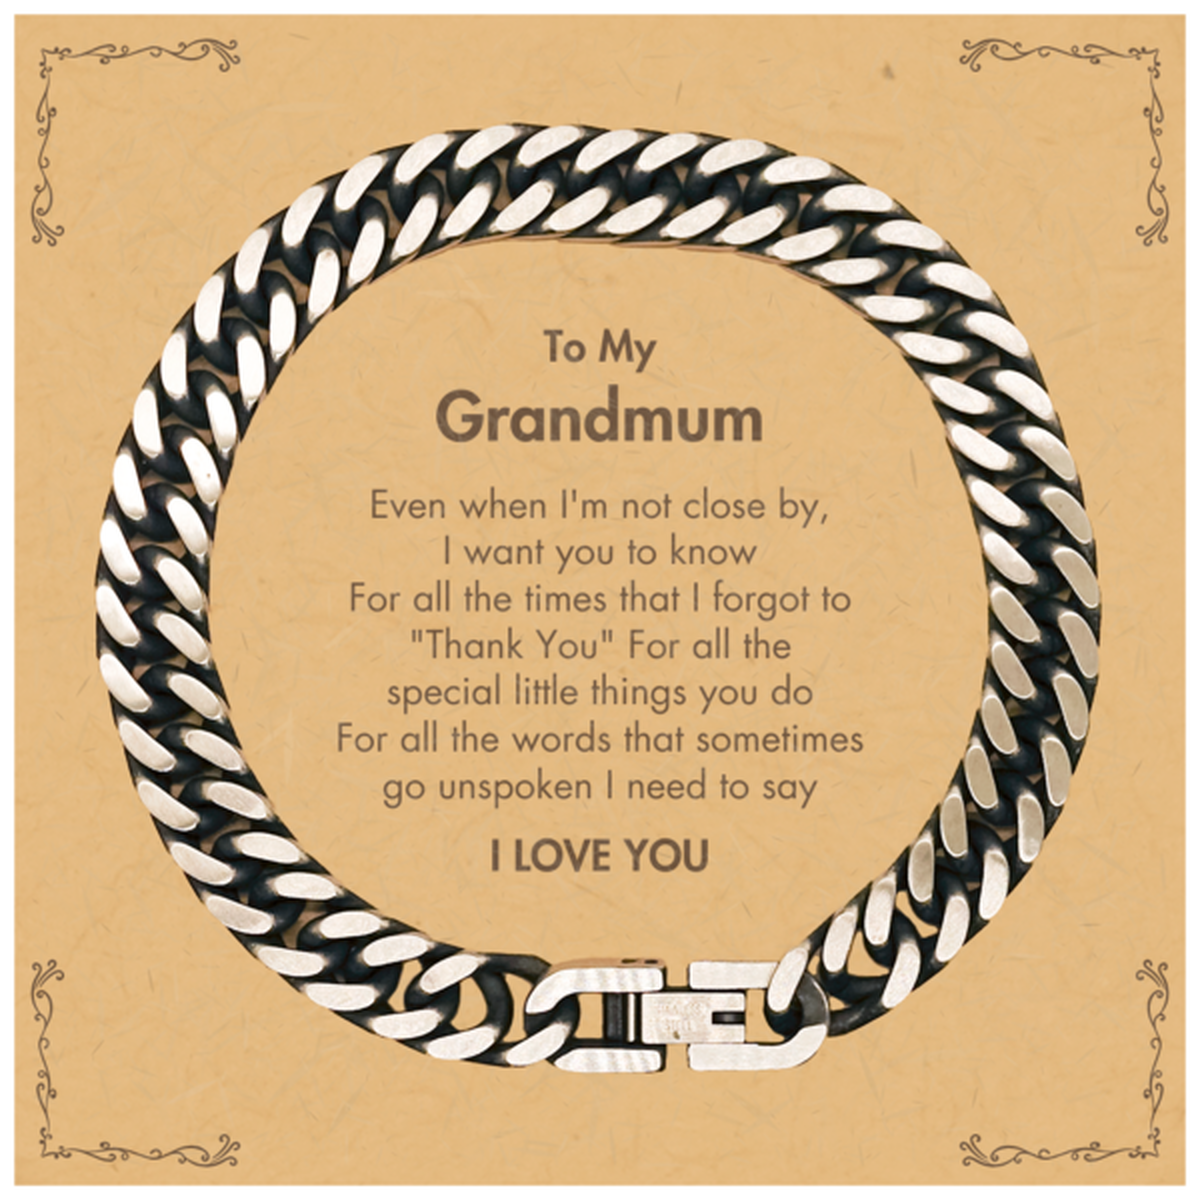 Thank You Gifts for Grandmum, Keepsake Cuban Link Chain Bracelet Gifts for Grandmum Birthday Mother's day Father's Day Grandmum For all the words That sometimes go unspoken I need to say I LOVE YOU